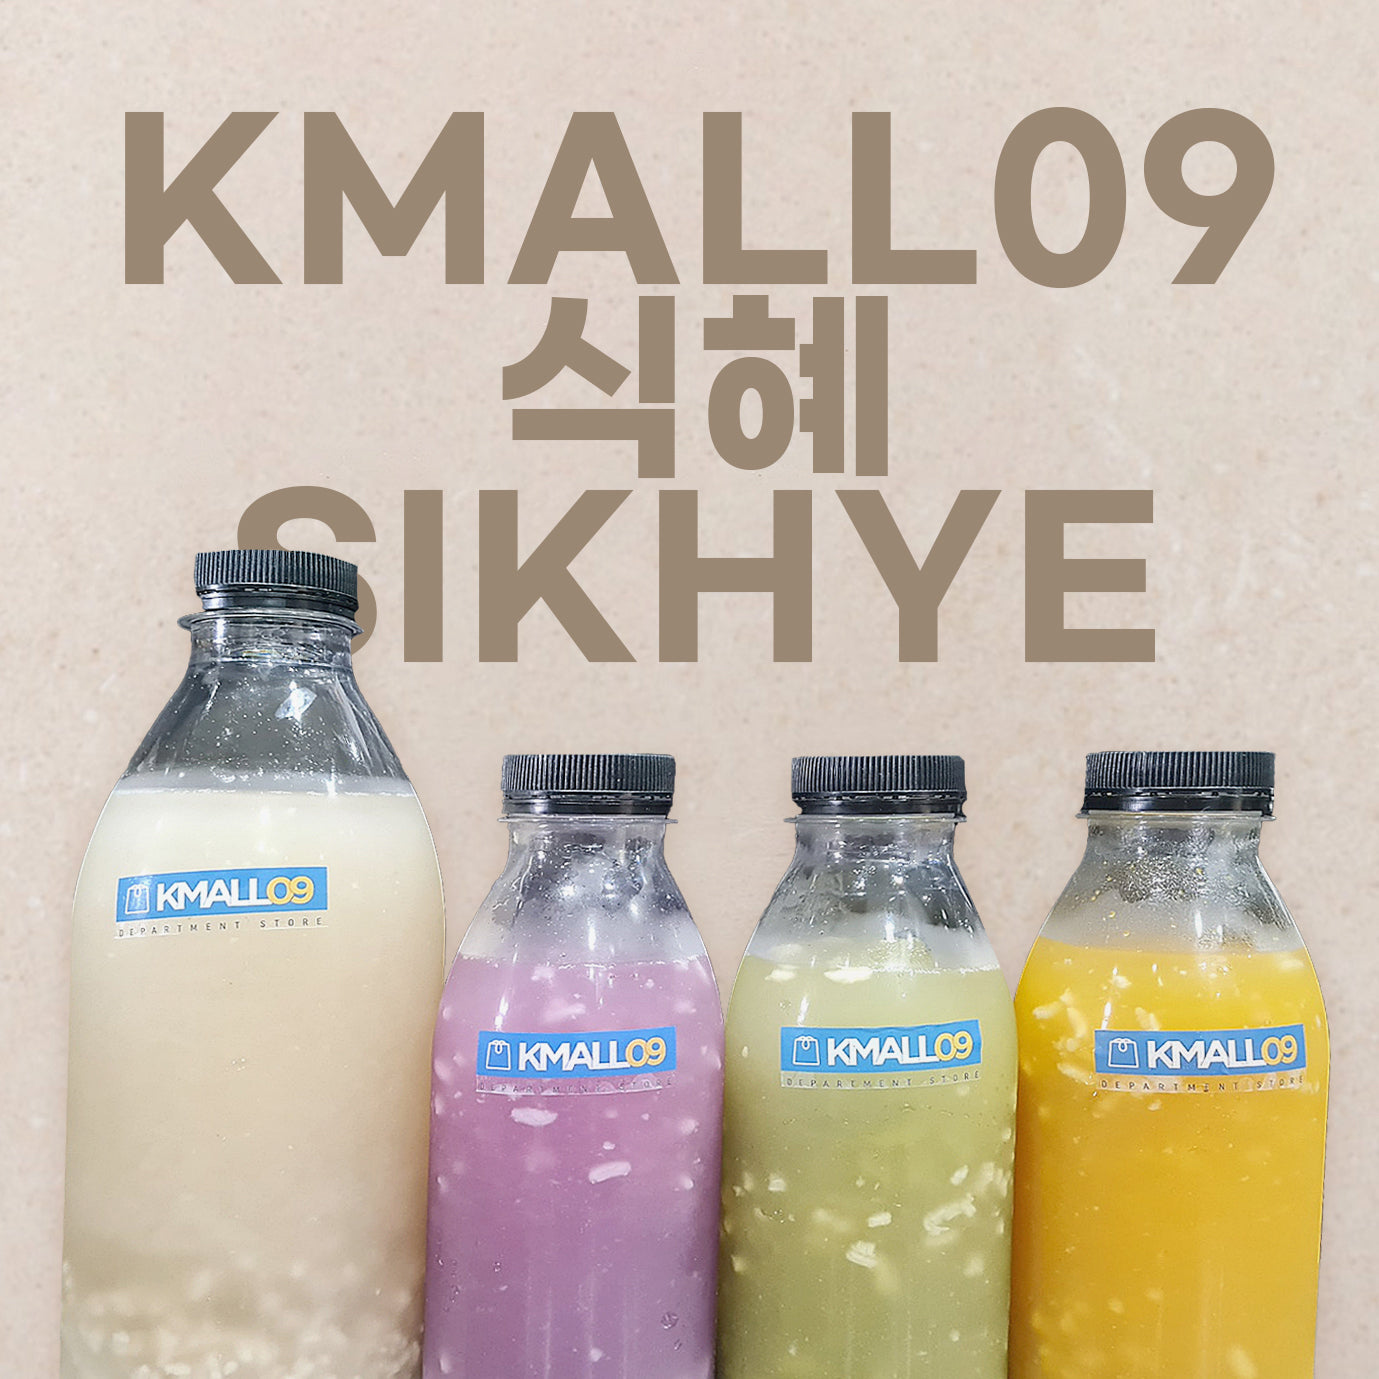 SYDNEY ONLY🚛 ONLY KMALL09 Sikhye (kind of Rice punch) 4kinds